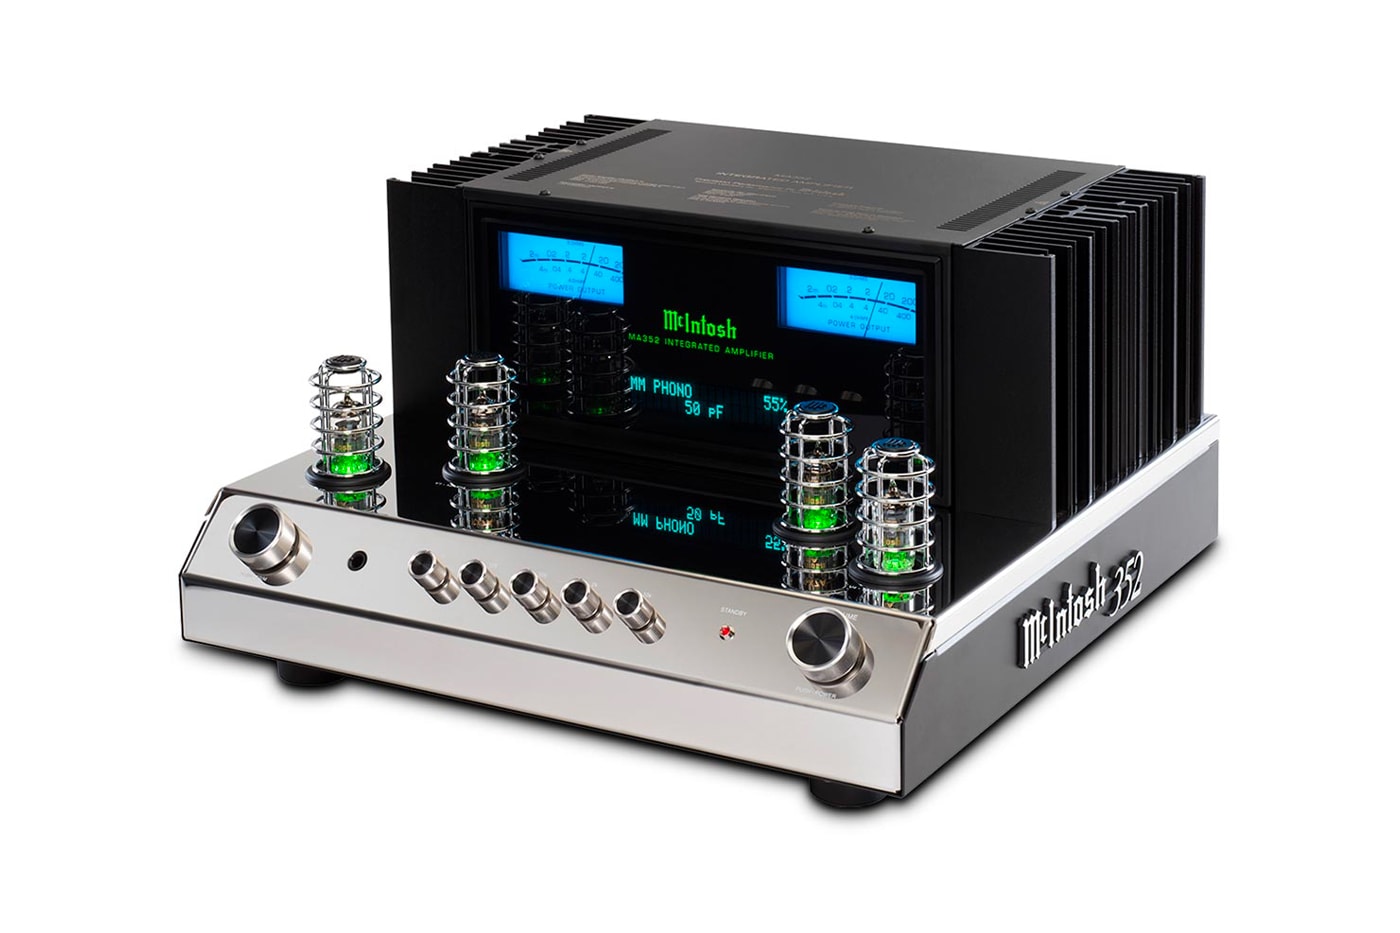 McIntosh Labs Releases MA352 Integrated Amplifier audio equipment design vacuum tube solid state design buy now hybrid 200 Watts into 8 Ohms 320 Watts into 4 Ohms 5-band tone control